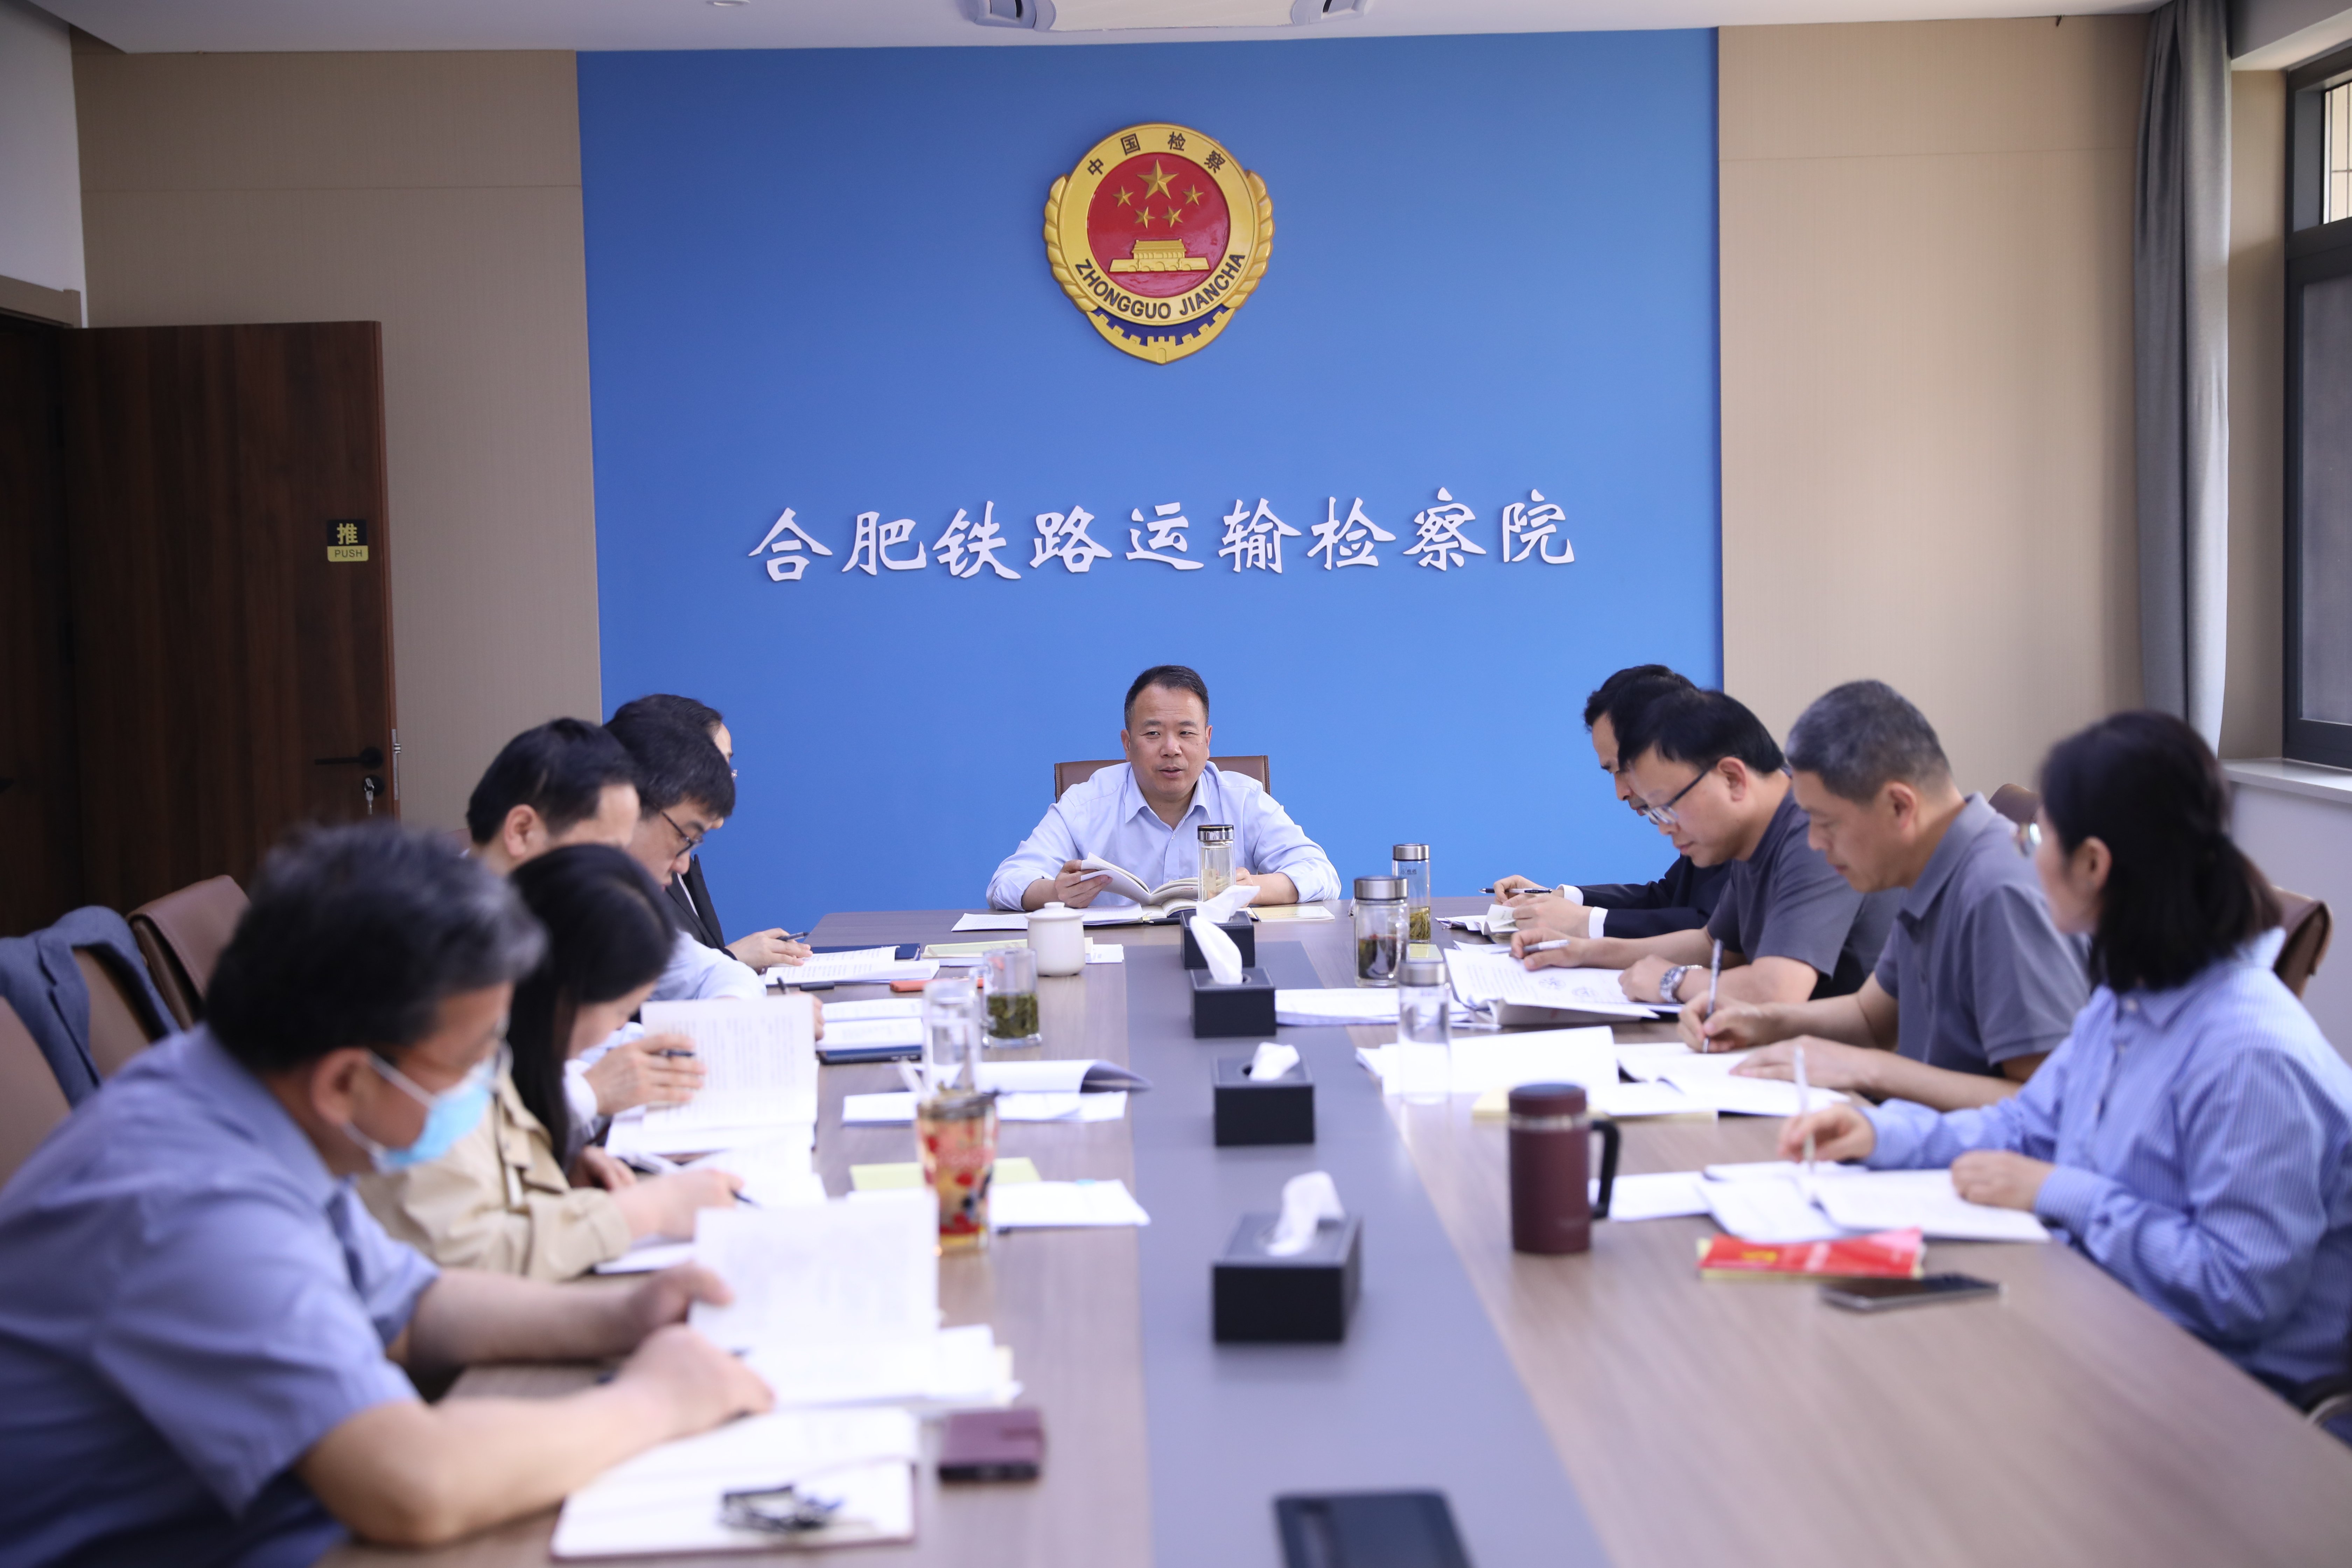  Hefei Railway Transport Procuratorate Actively Carries out Special Study on Party Discipline Study and Education